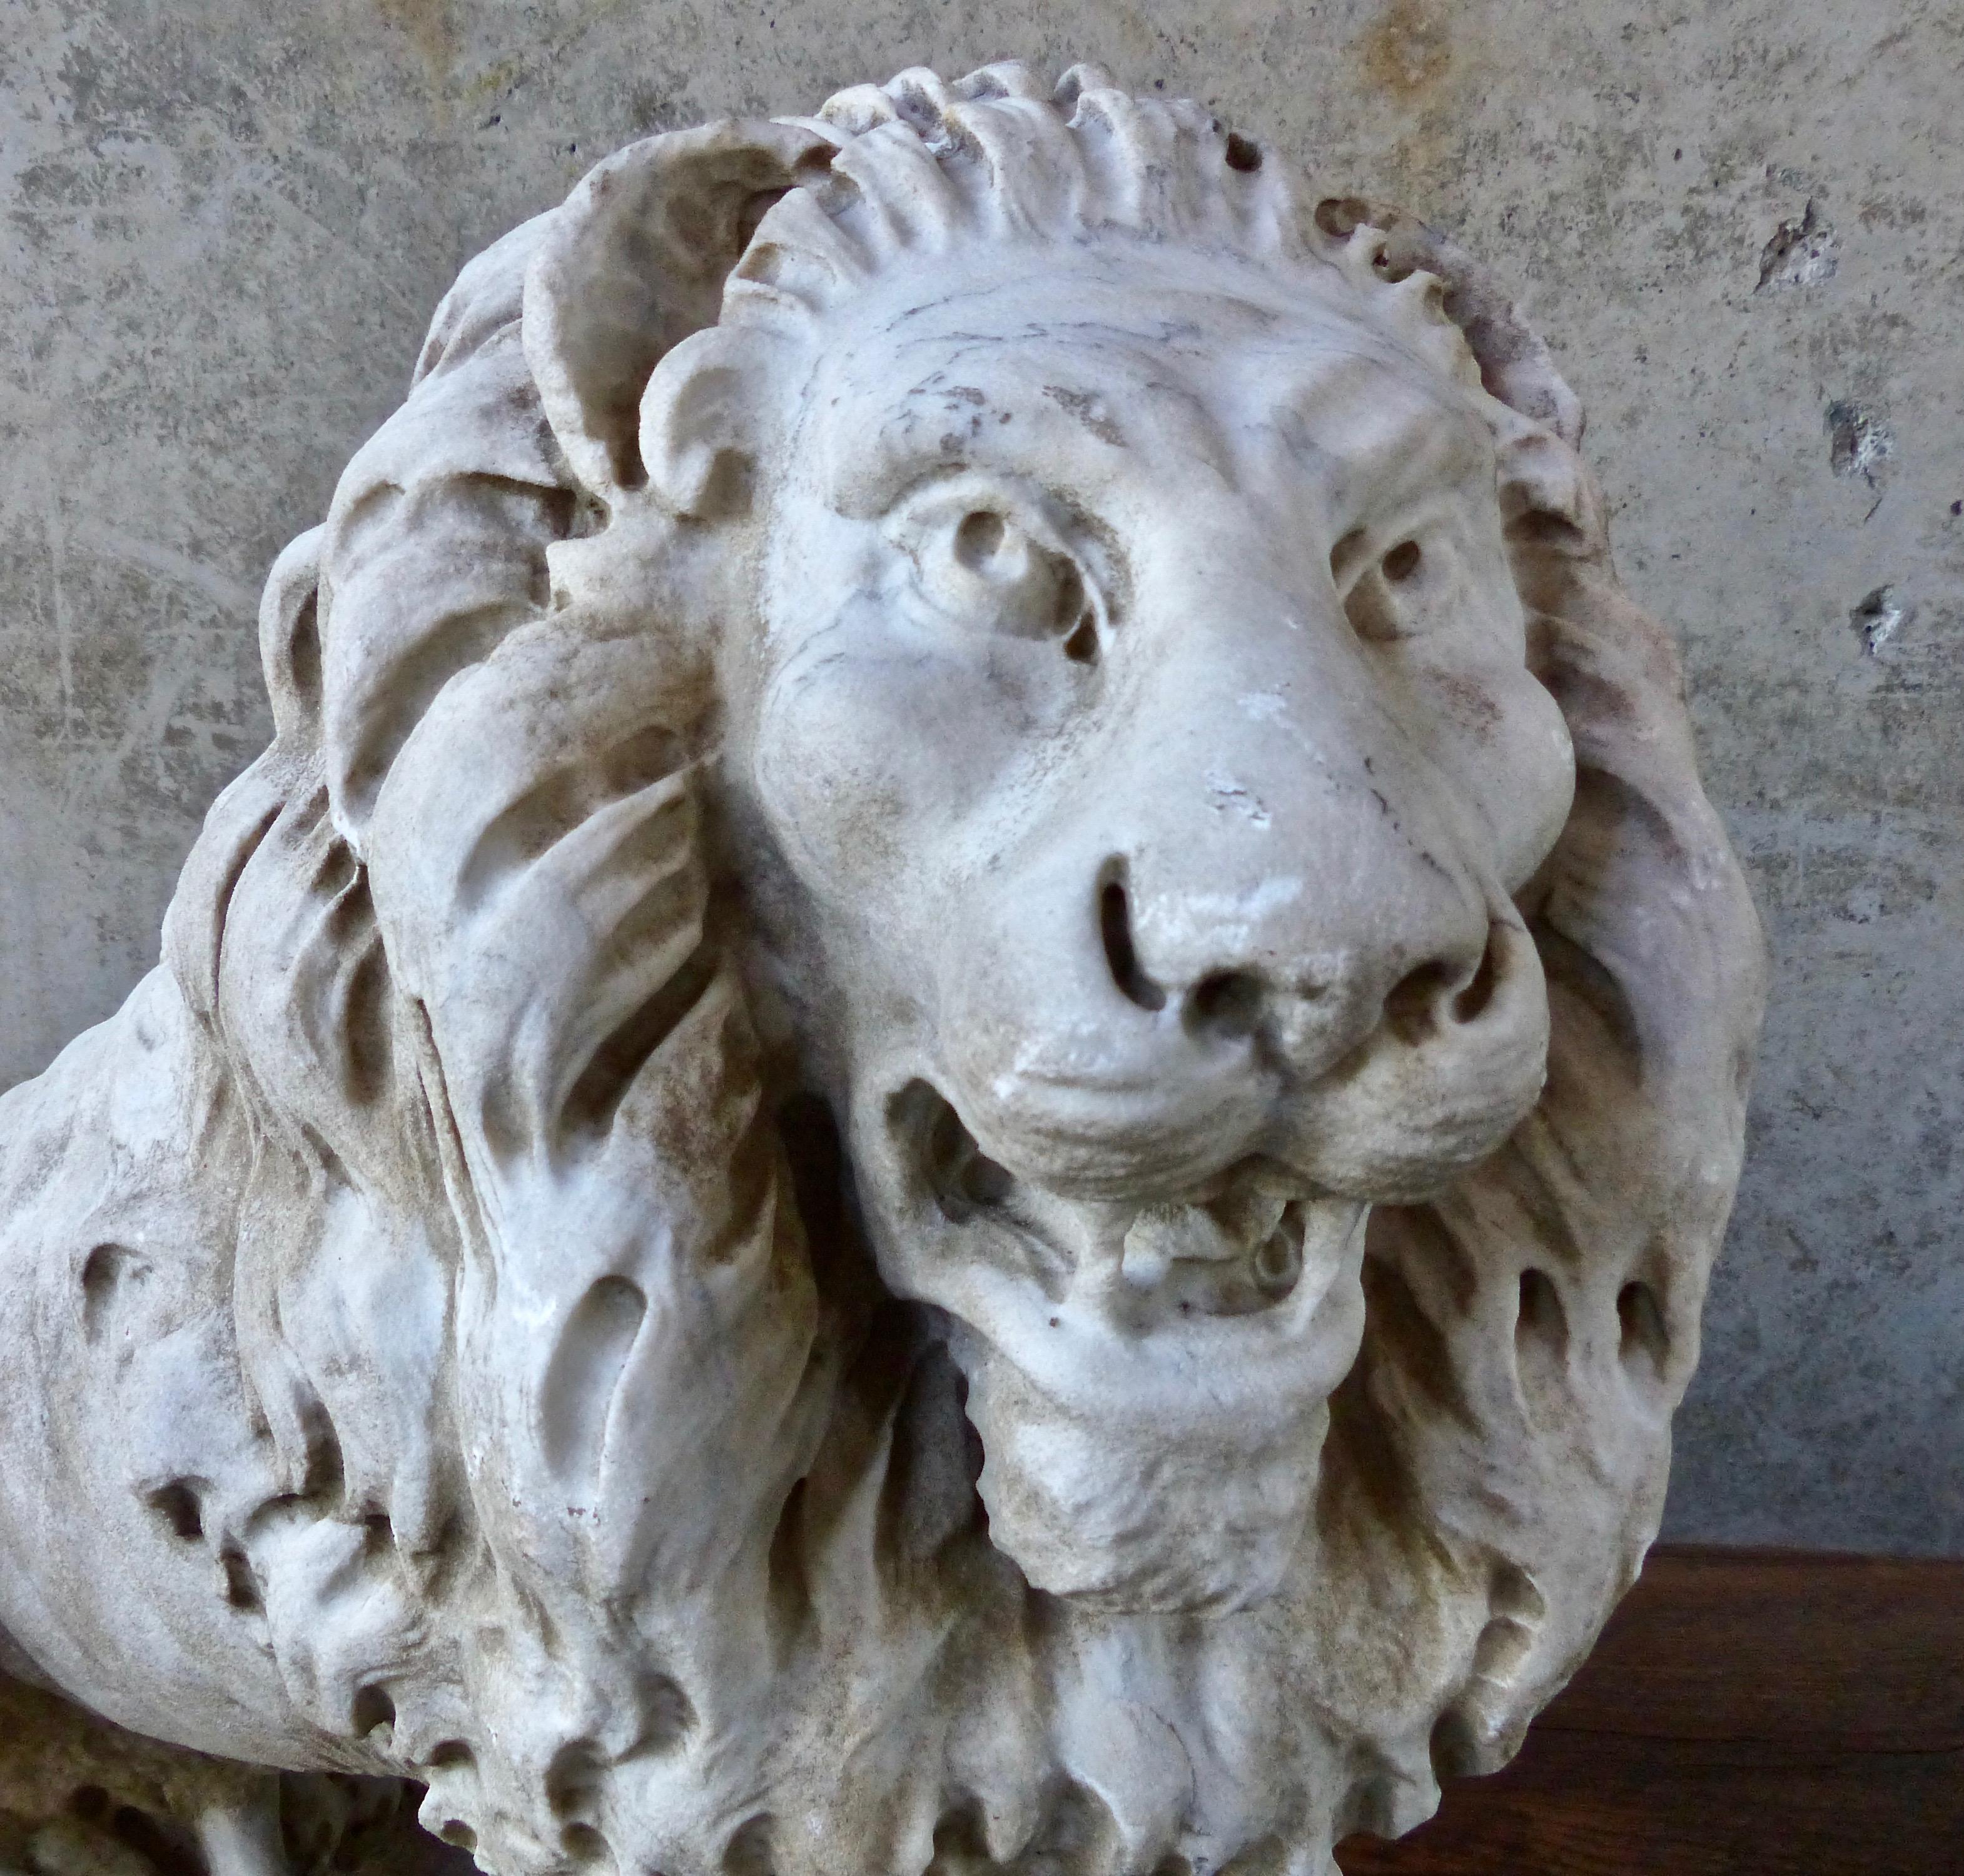 Majestic pair of marble lions with flowing manes and other beautifully hand carved details that give them personality and intimacy. Late 1880s, Italian, and resting on their own bases.
Research pending.
Update- Lions have been identified as coming